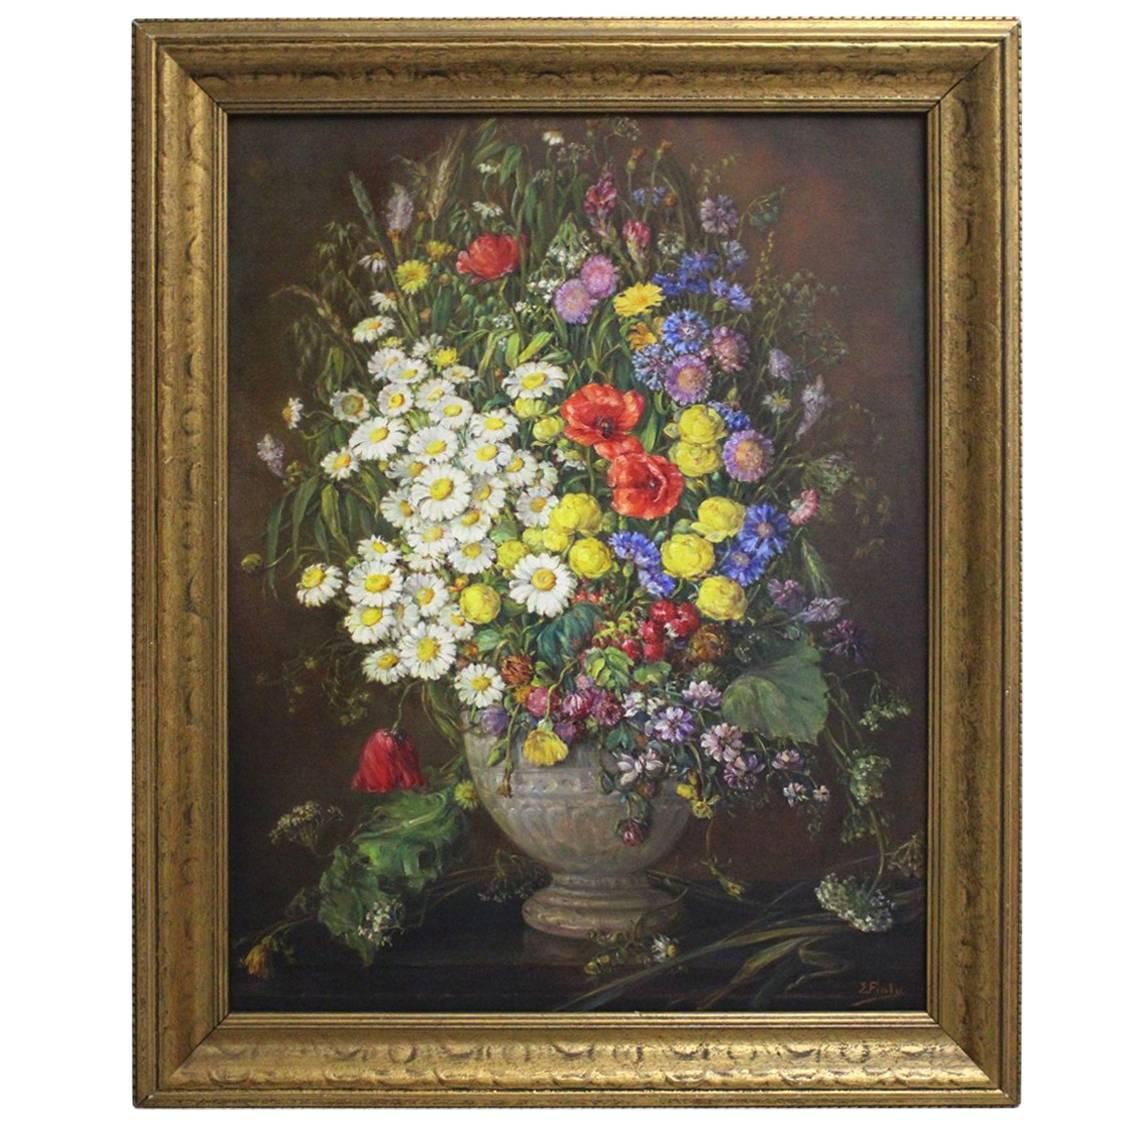 Art Deco Era Oil on Canvas Painting Wildflowers by Emil Fiala Vienna, 1930s